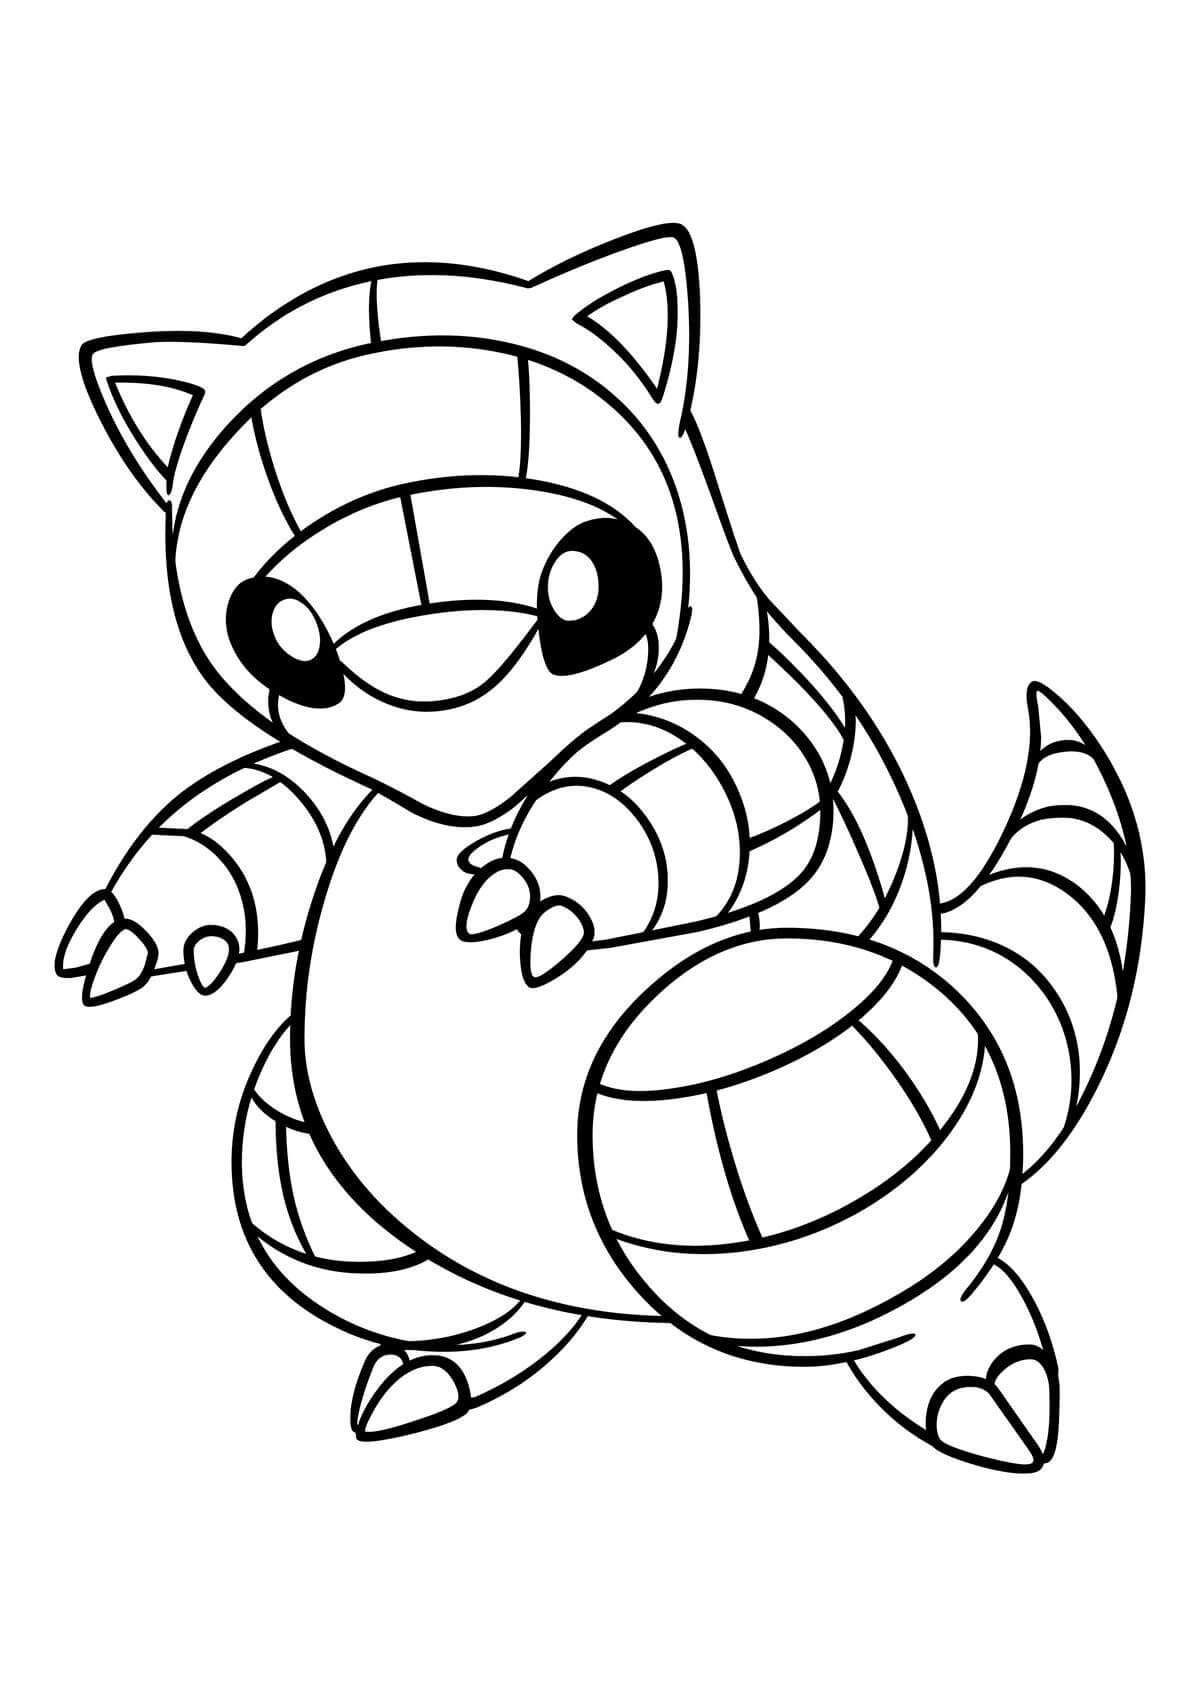 Sandshrew Coloring Pages - Free ...